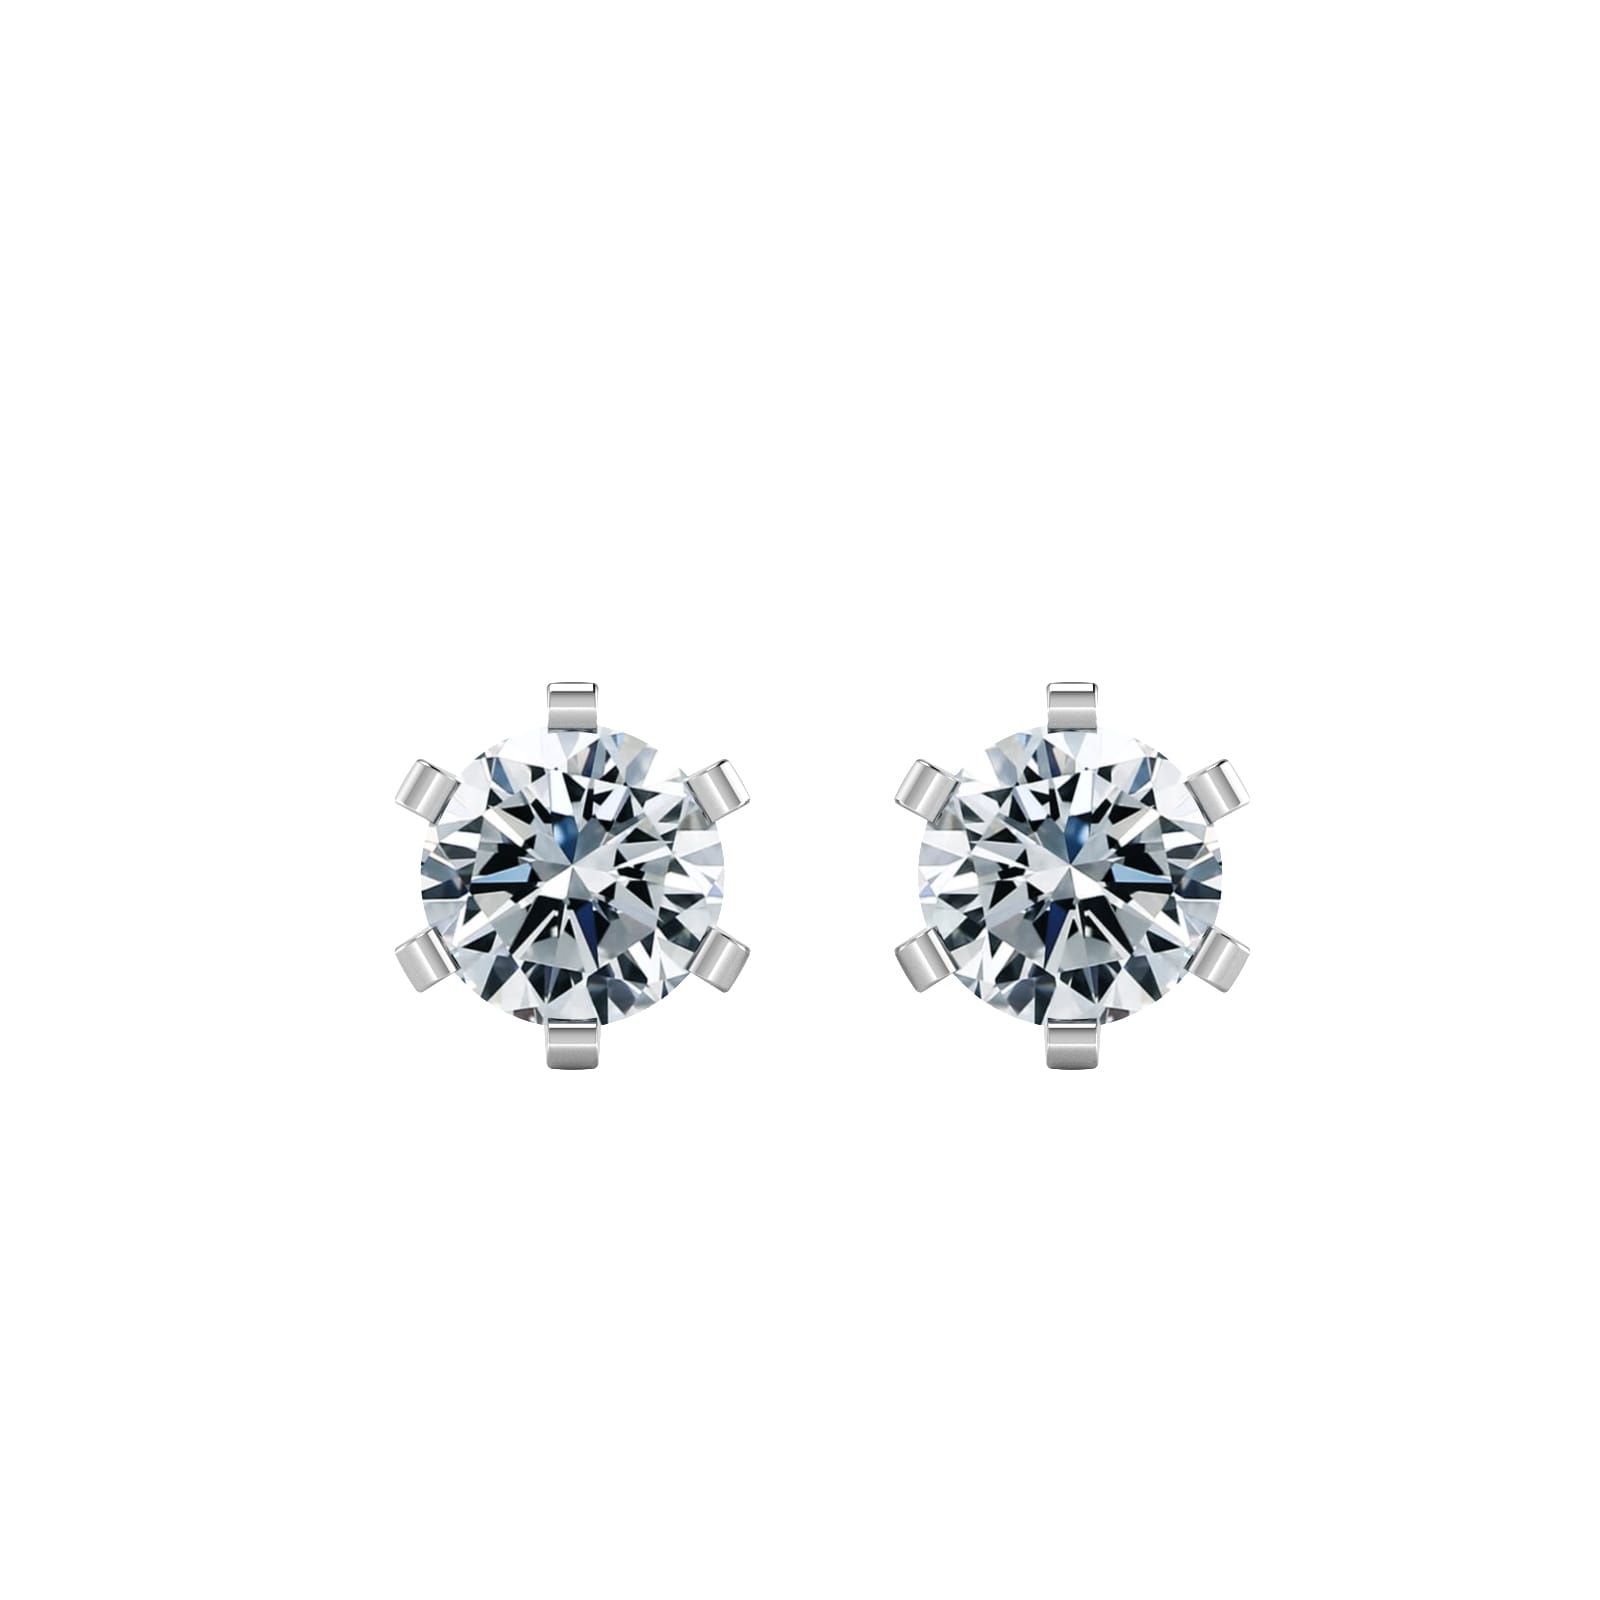 18ct White Gold 0.80cttw Solitaire Diamond Stud Earrings